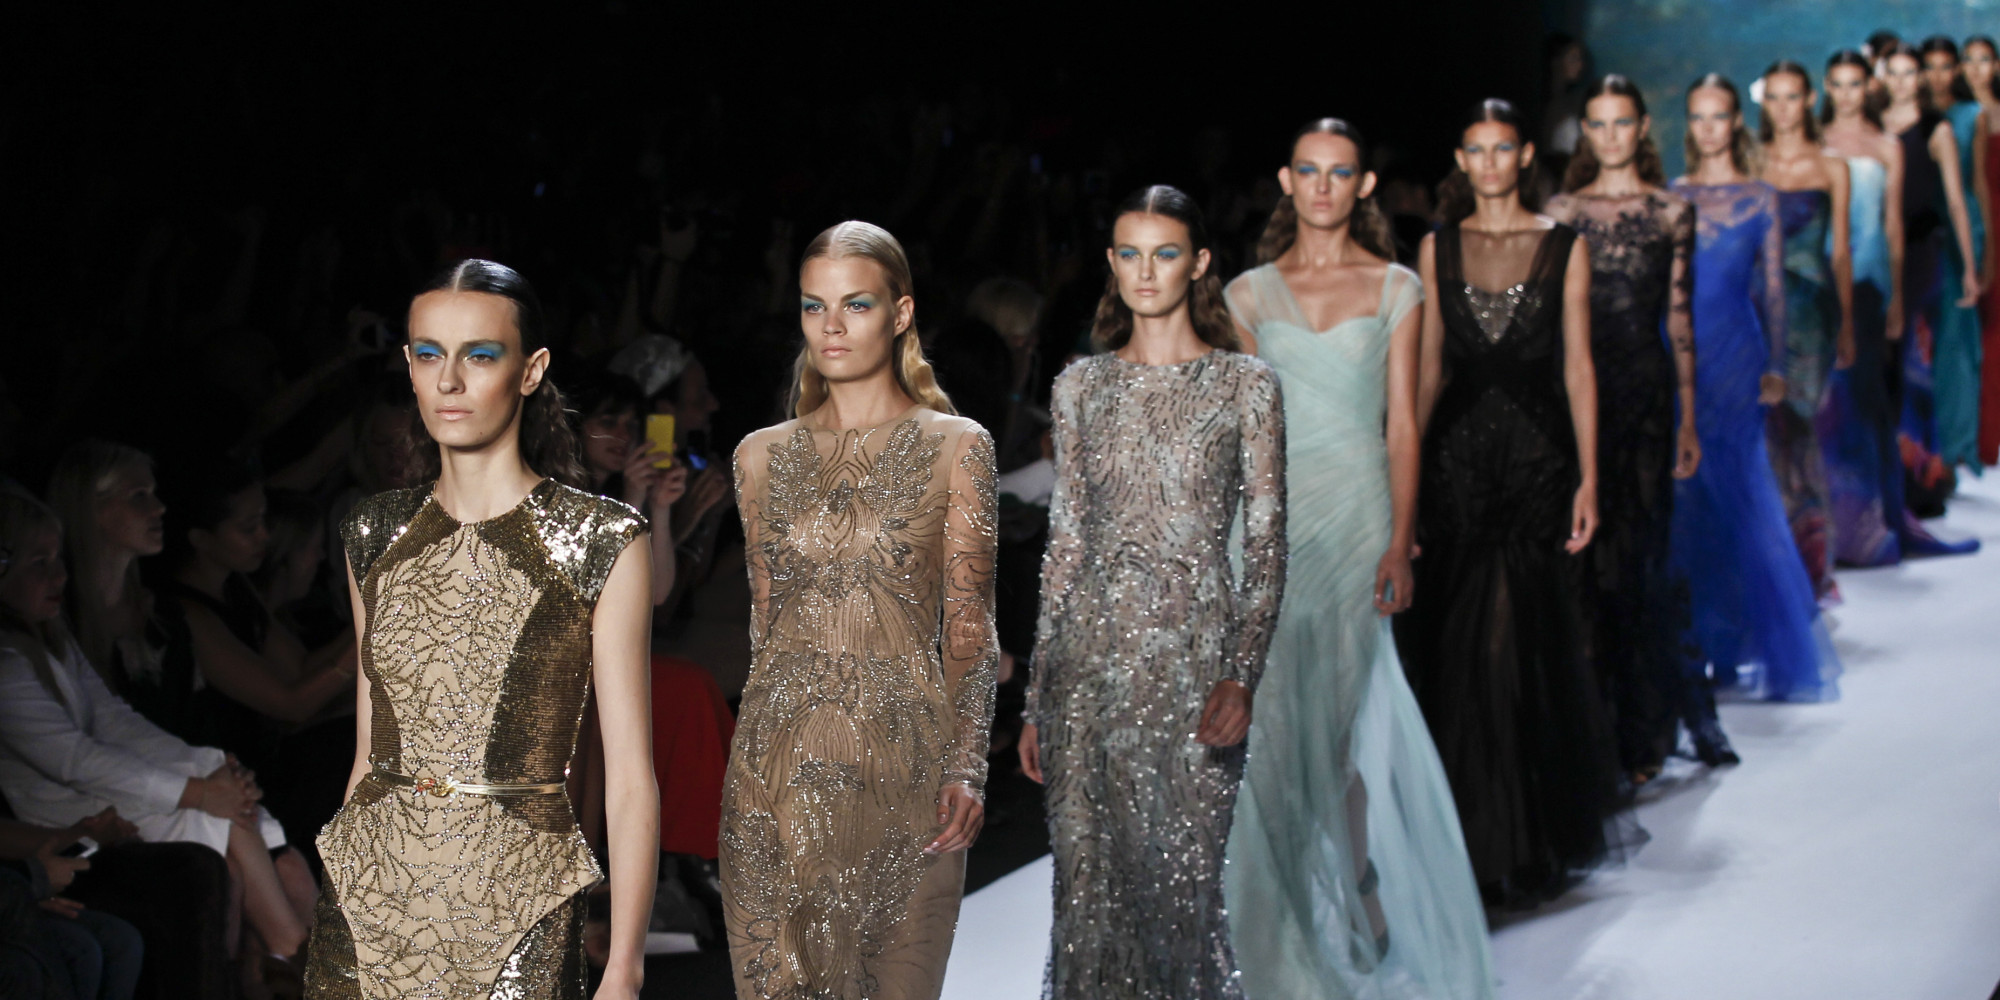 11 Unforgettable Past Russian Fashion Week Collections | HuffPost